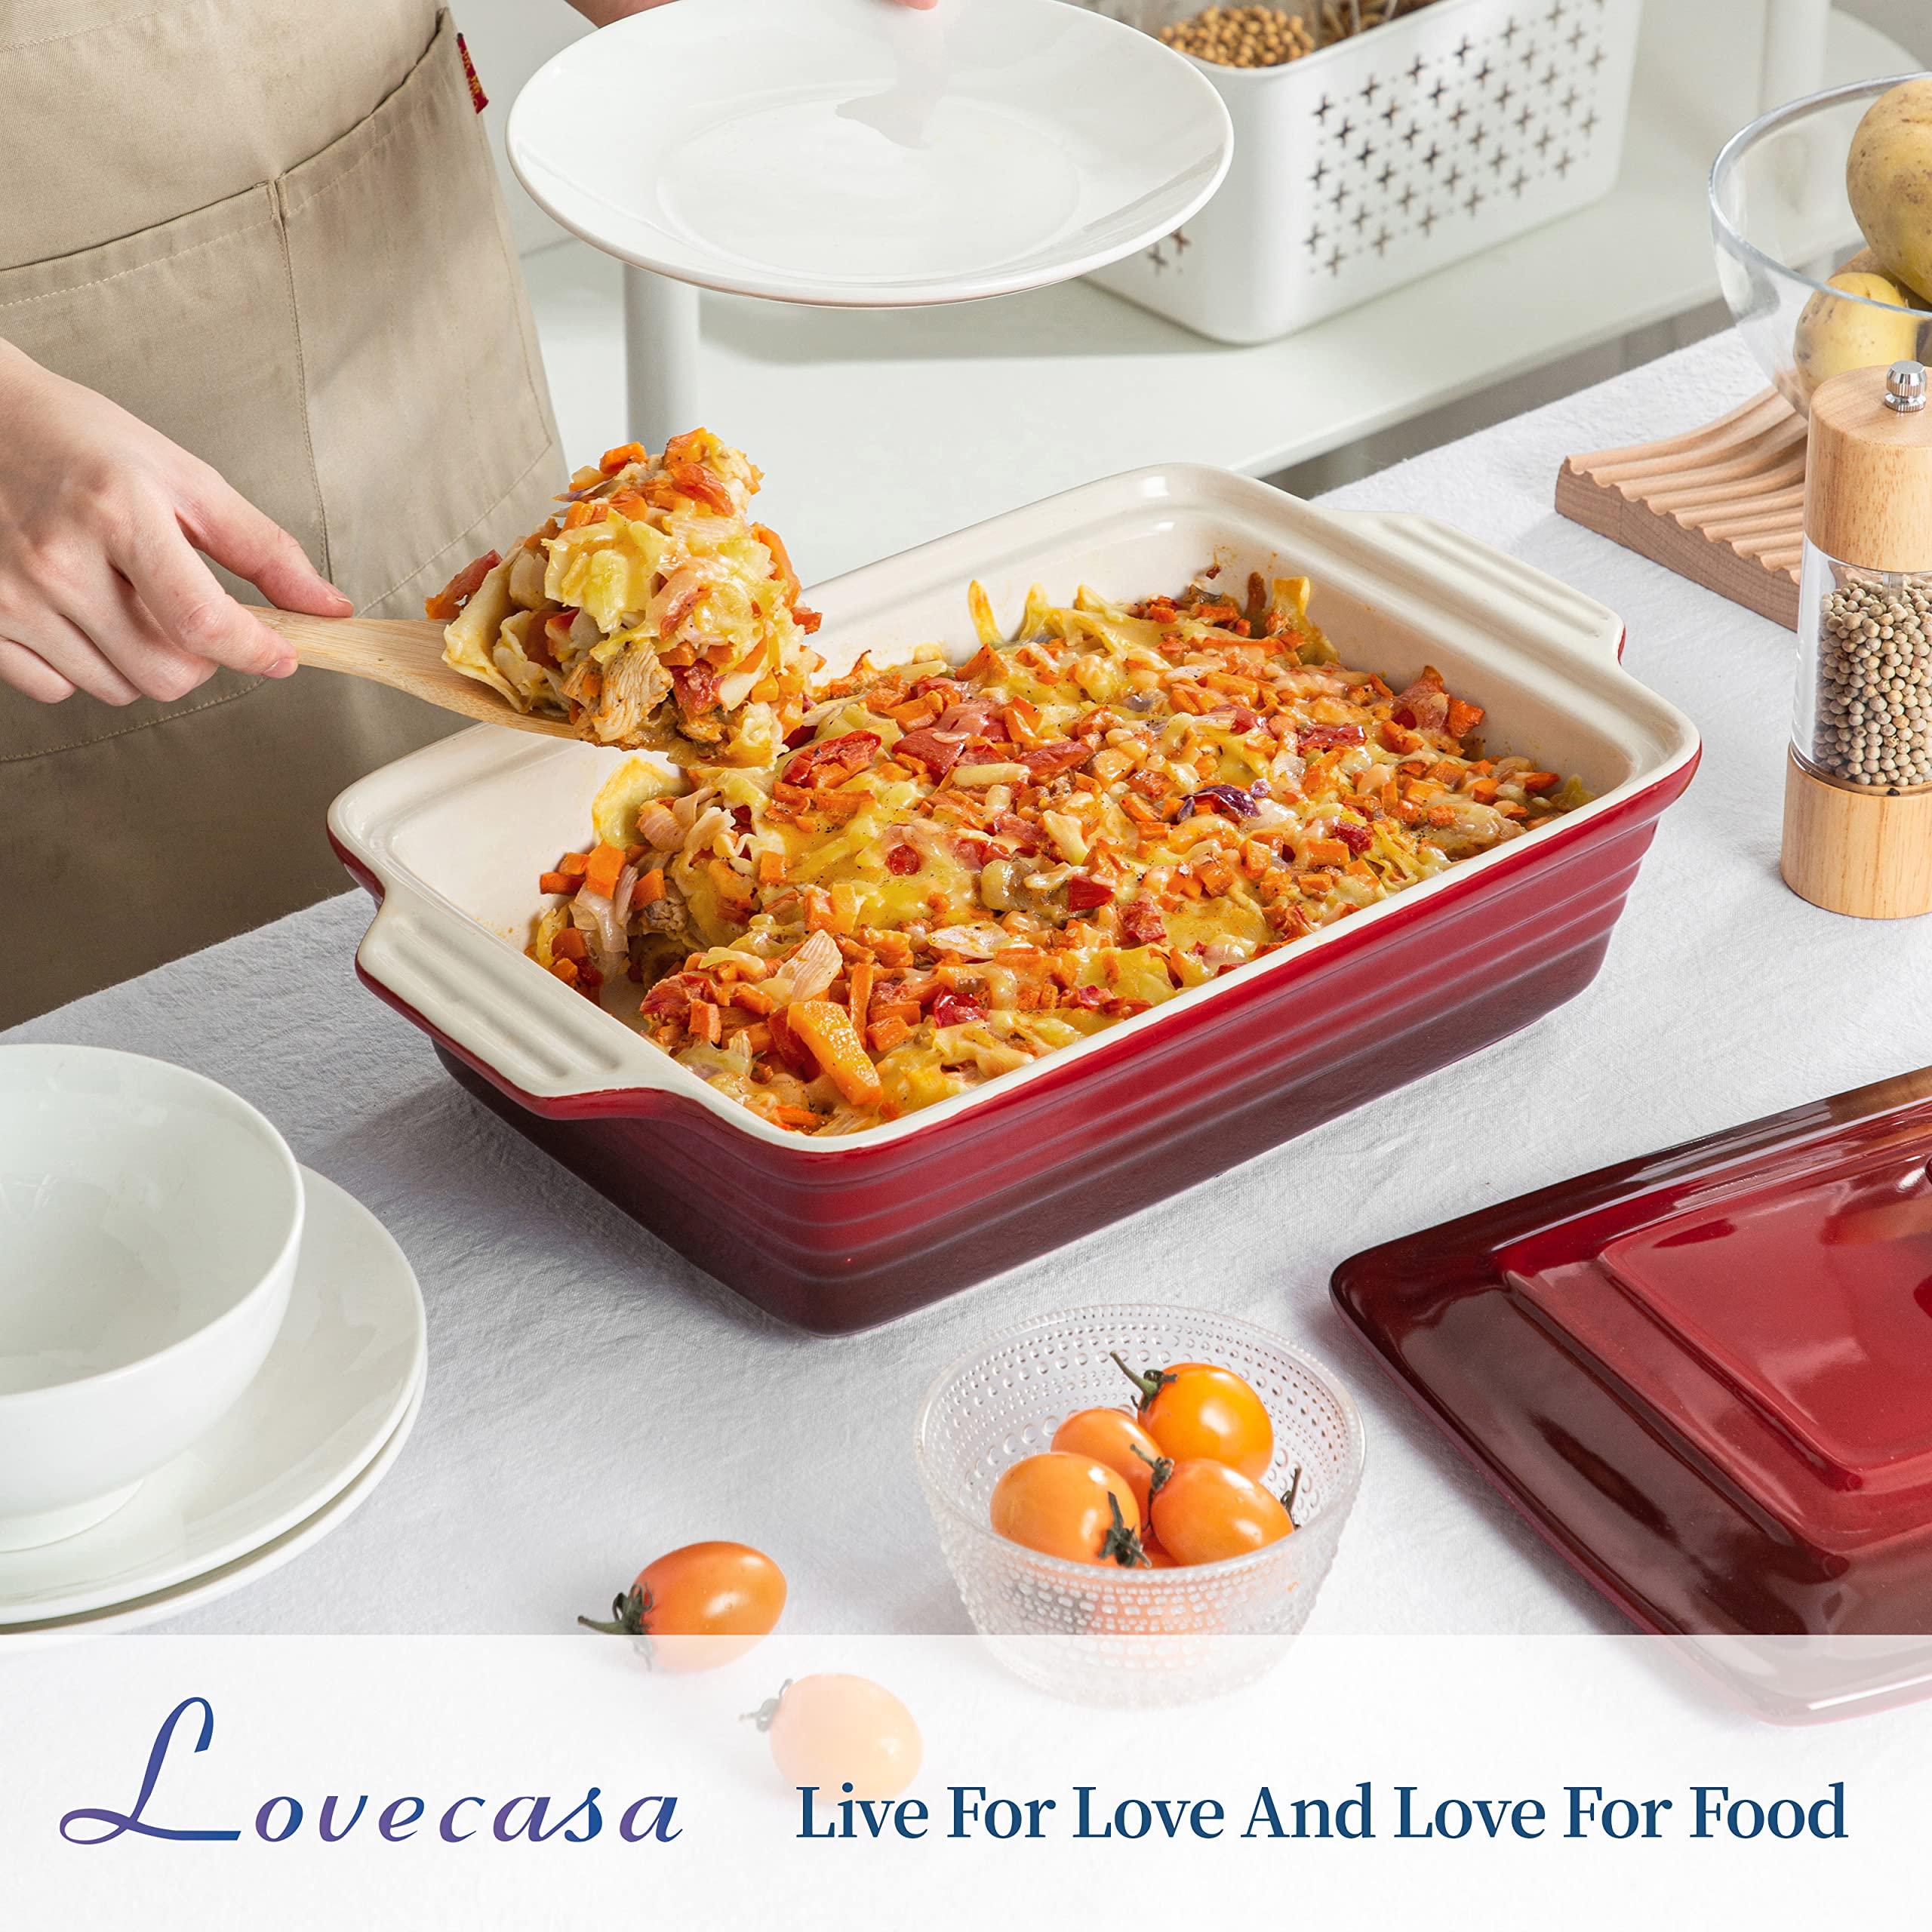 4.5 Quart Nonstick Casserole Dish with Lid, LOVECASA 9 x 13 Inches Lasagna Pan Deep, Ceramic Baking Dish for Dinner, Banquet, and Party, Gradient Red